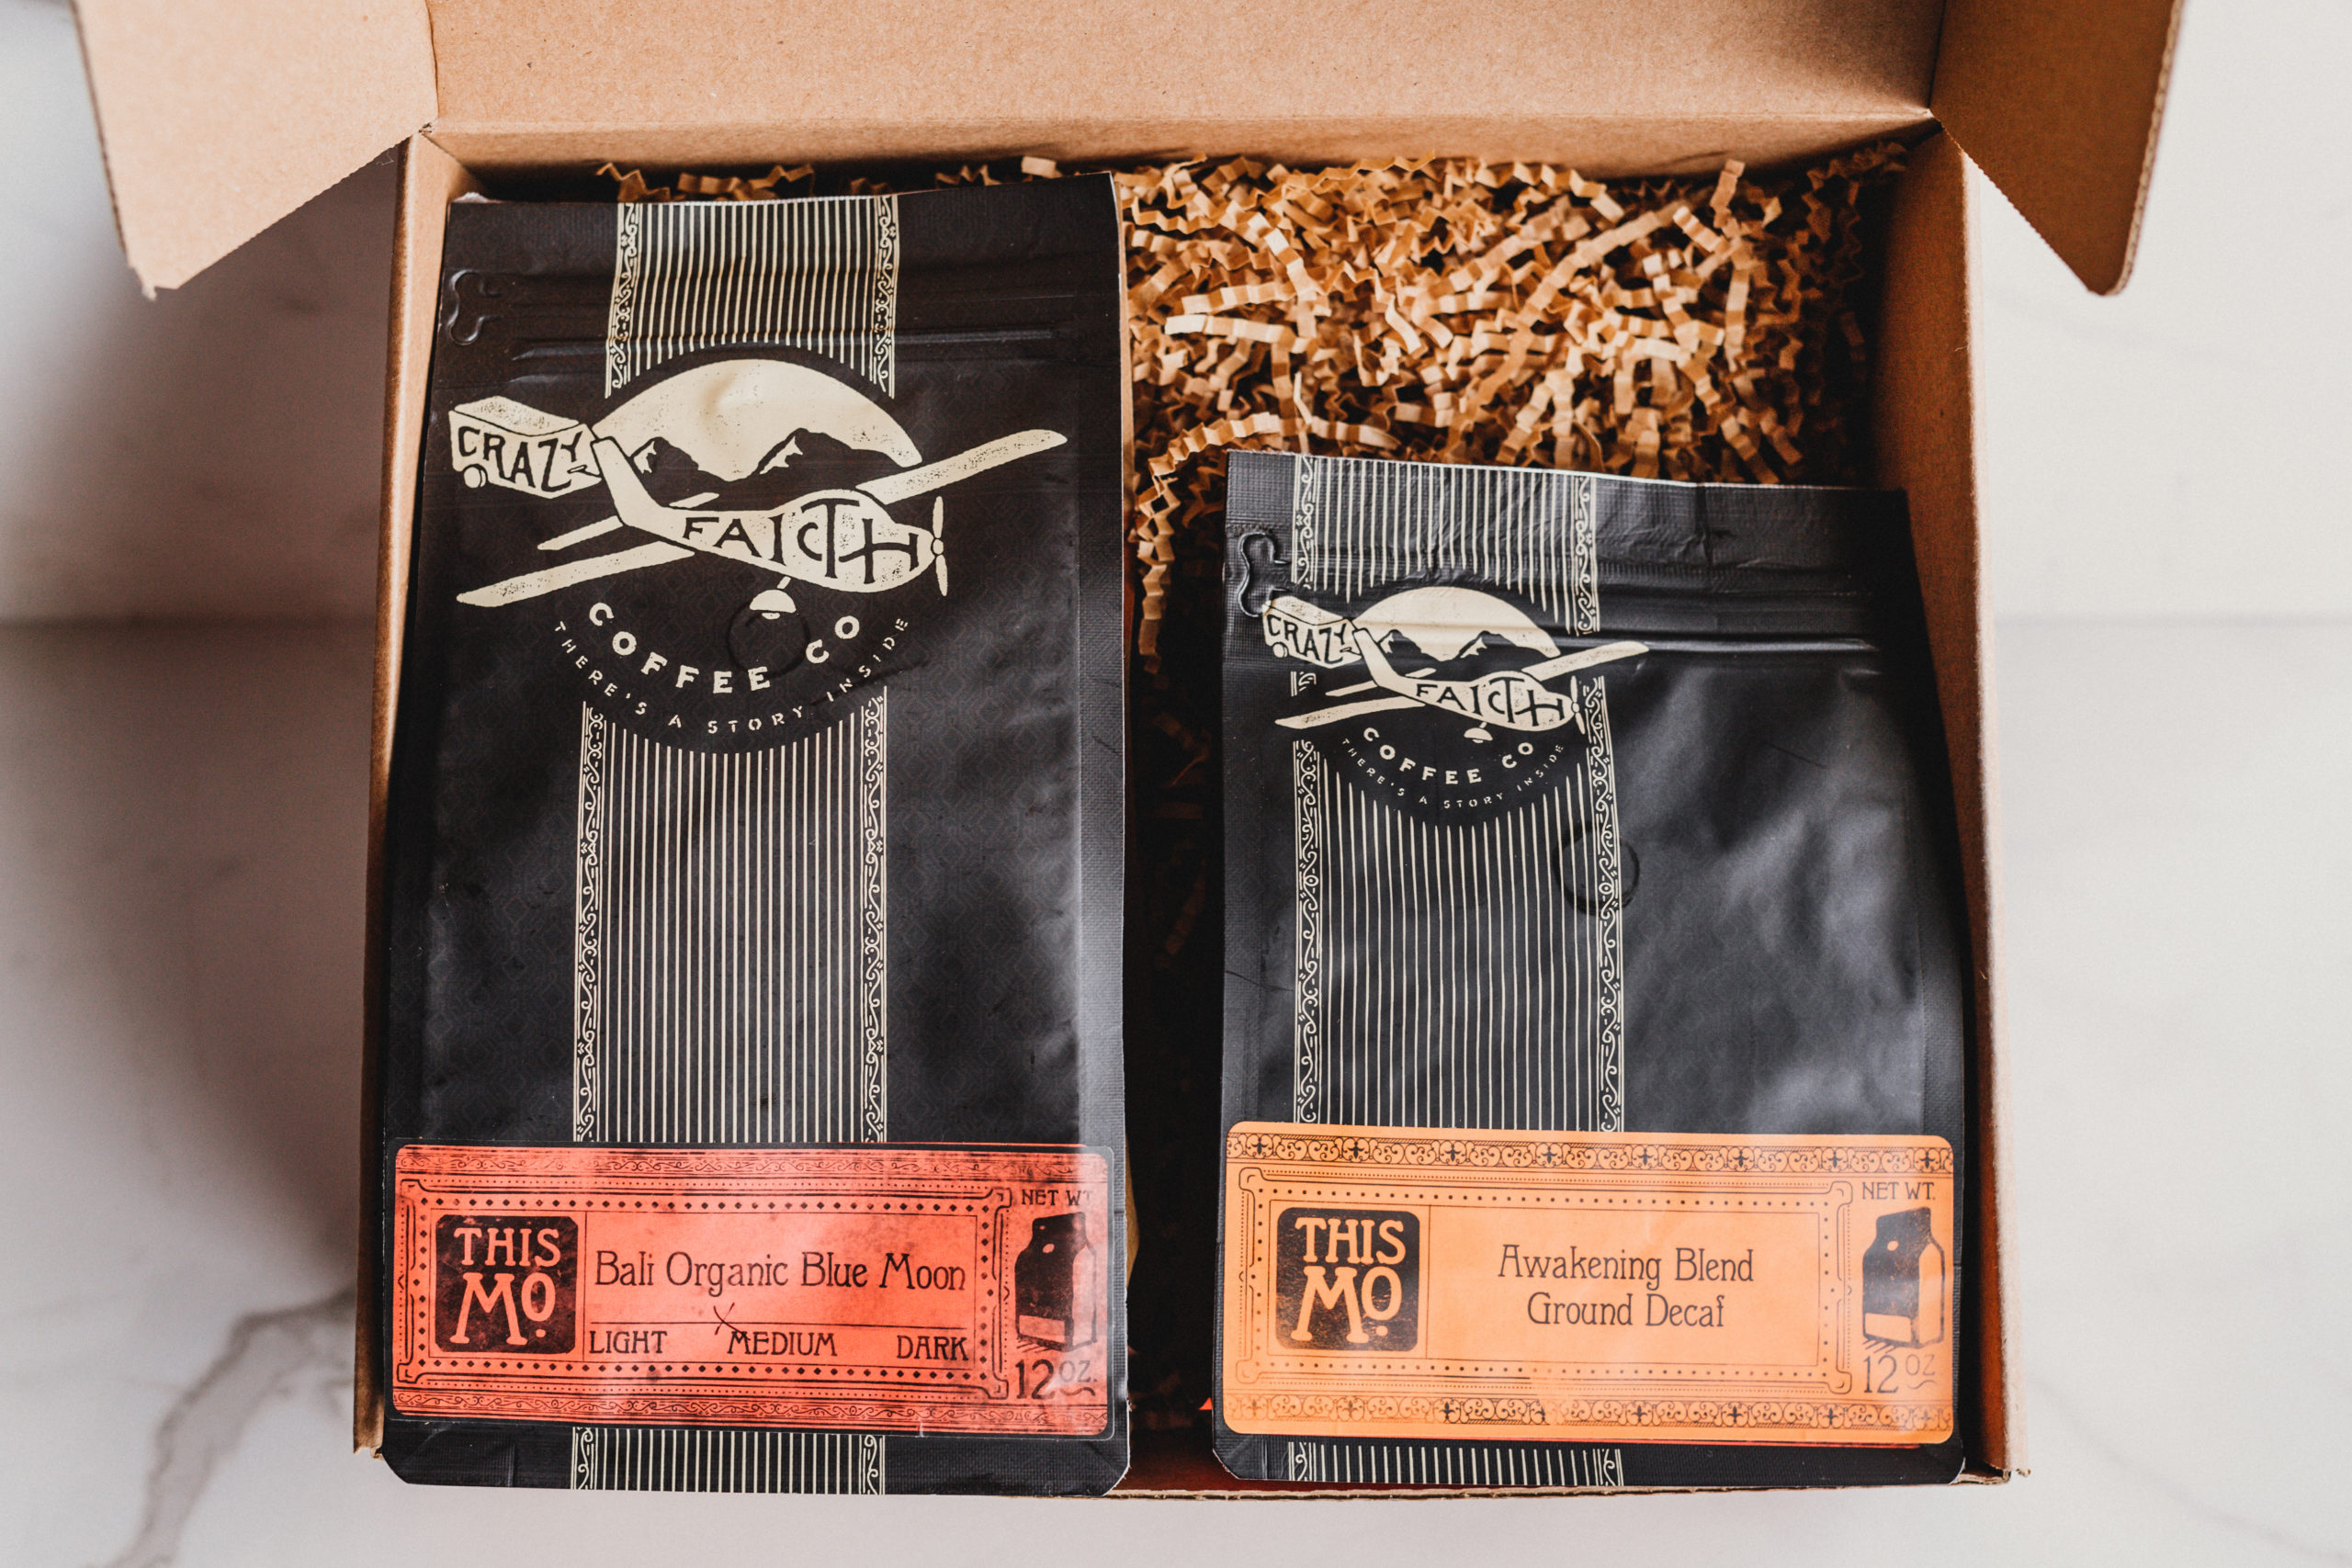 JSM Packages of Bali Organic Blue Moon and Awakening Blend Groud Decaf coffee beans in a box